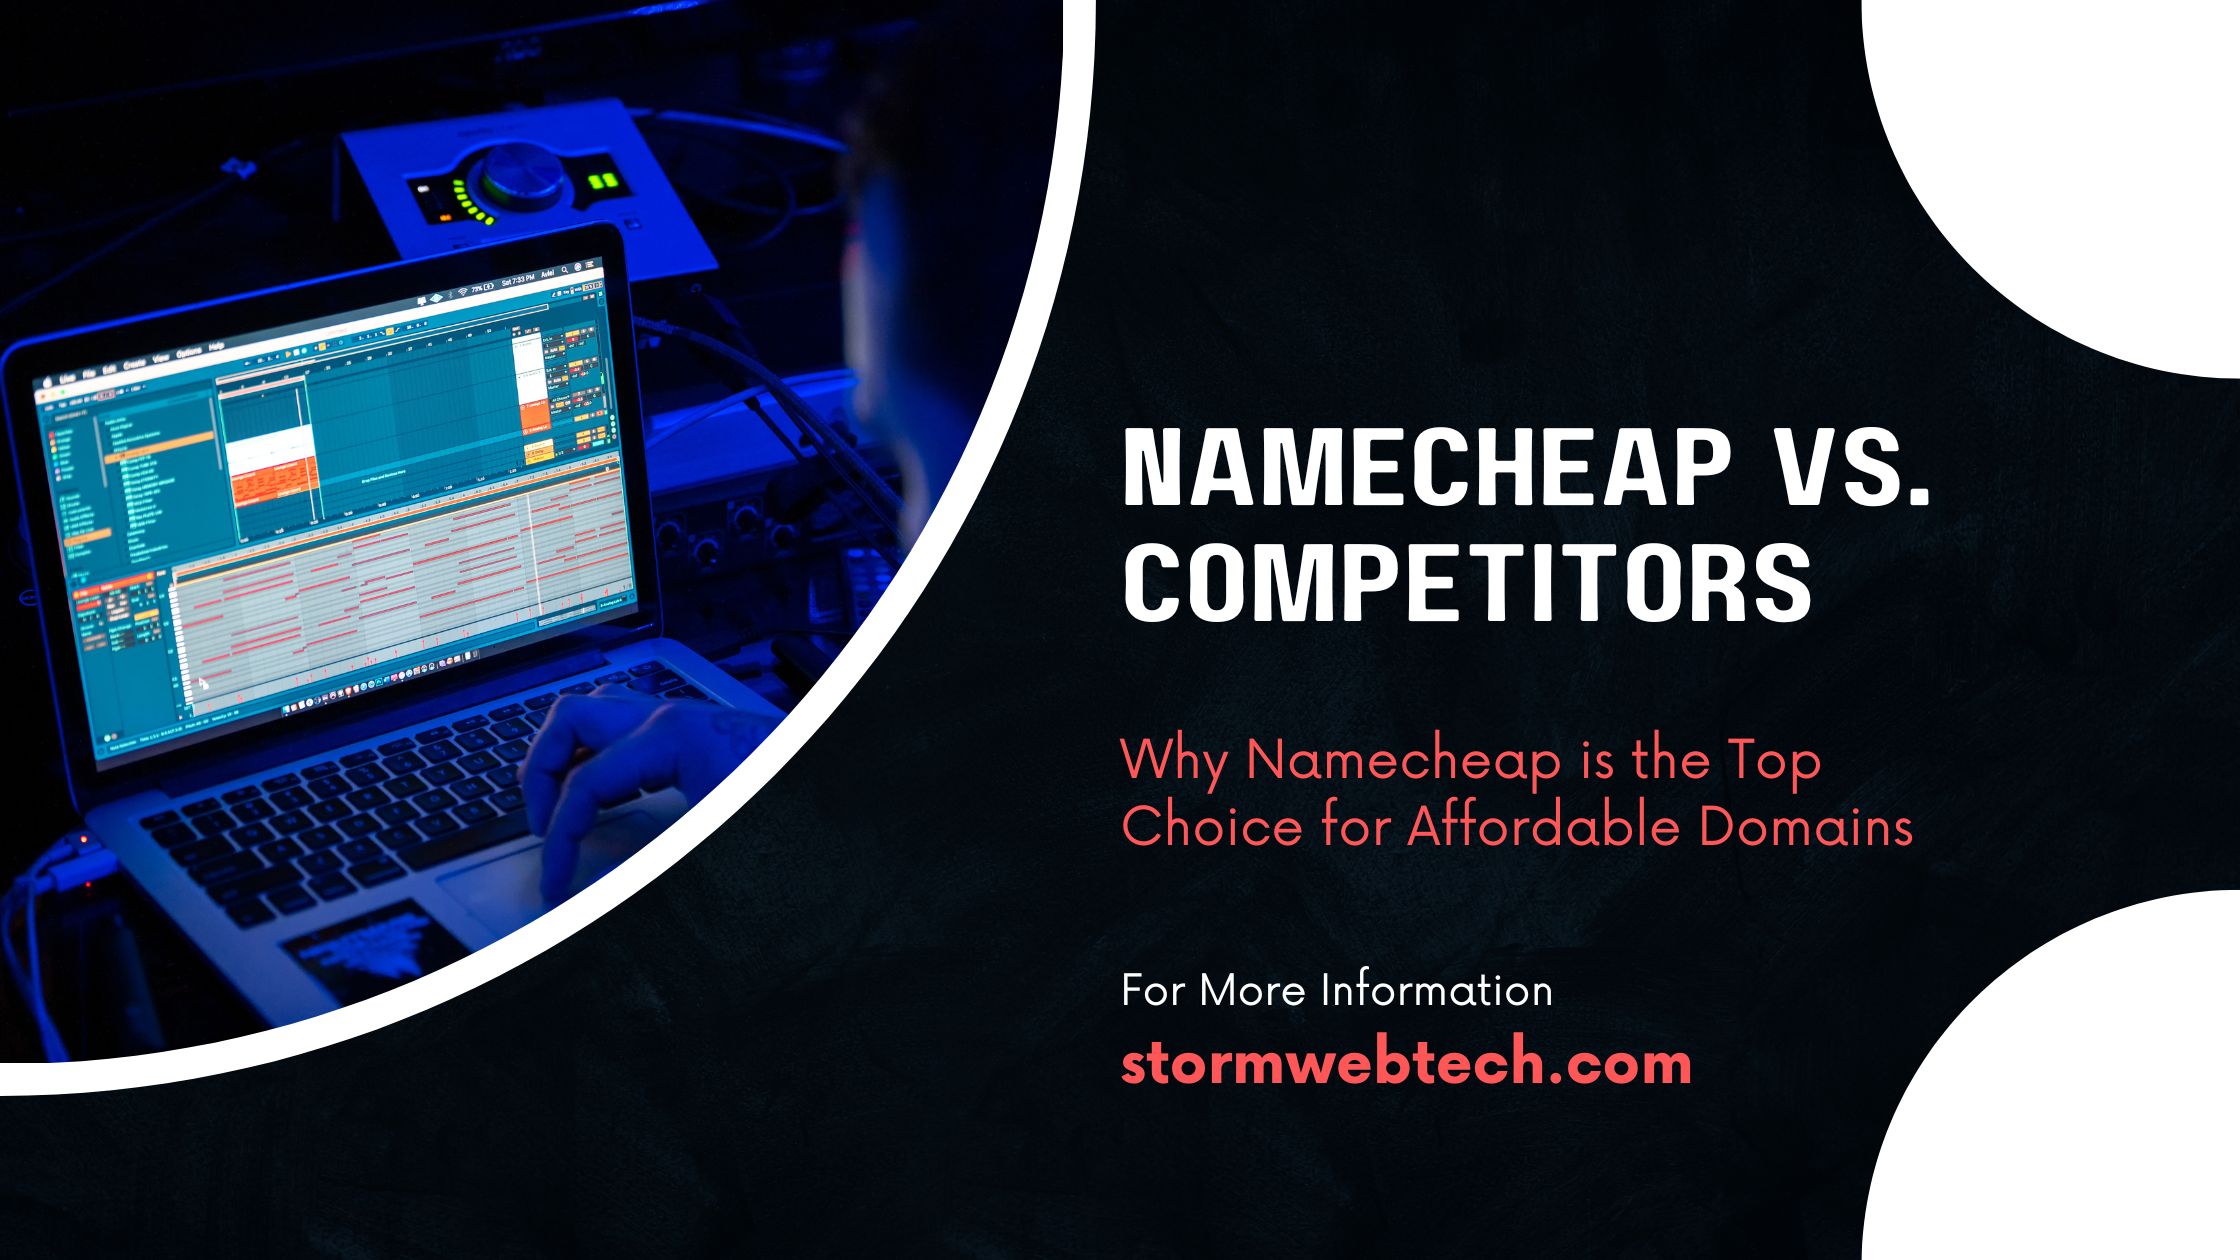 Namecheap Vs Competitors article, why Namecheap outshines its competitors and why it should be your top choice for securing your online identity.